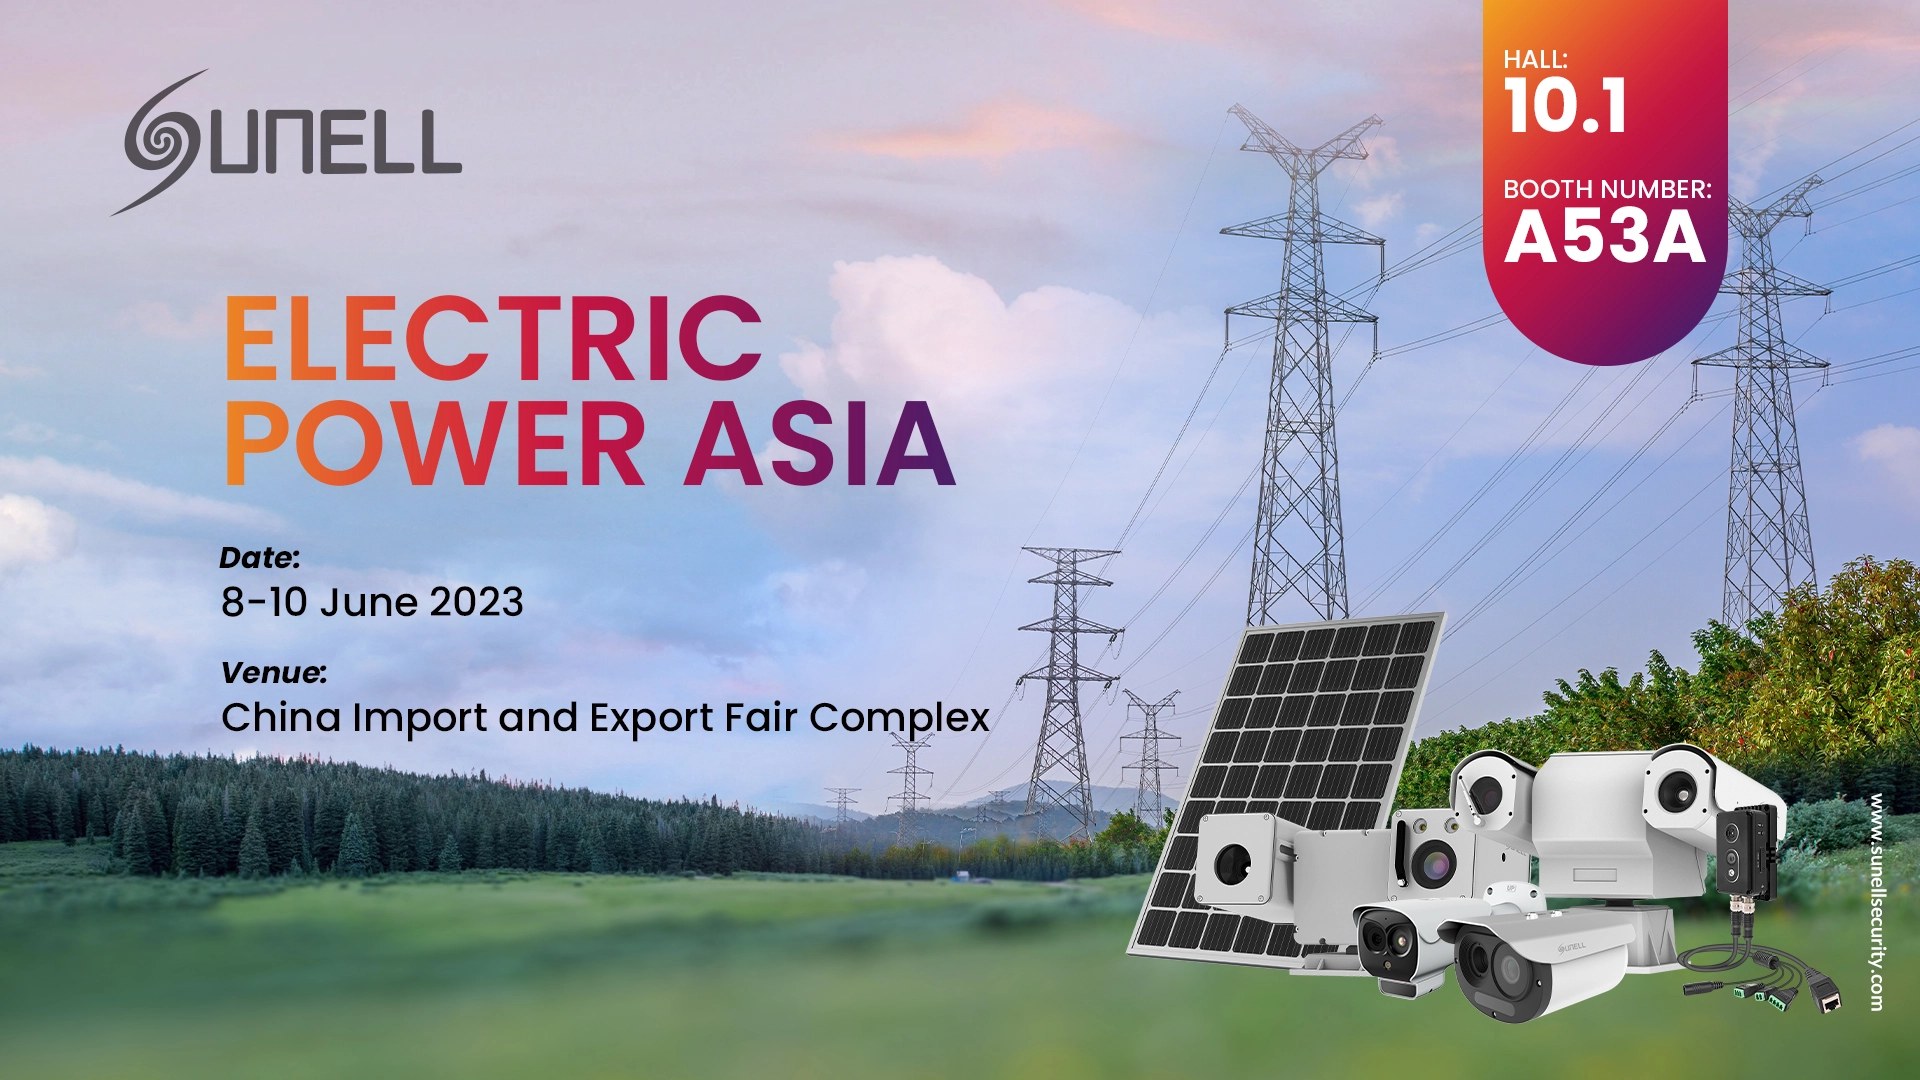 Sunell will showcase thermal imaging intelligent solutions at the Electrical Power ASIA